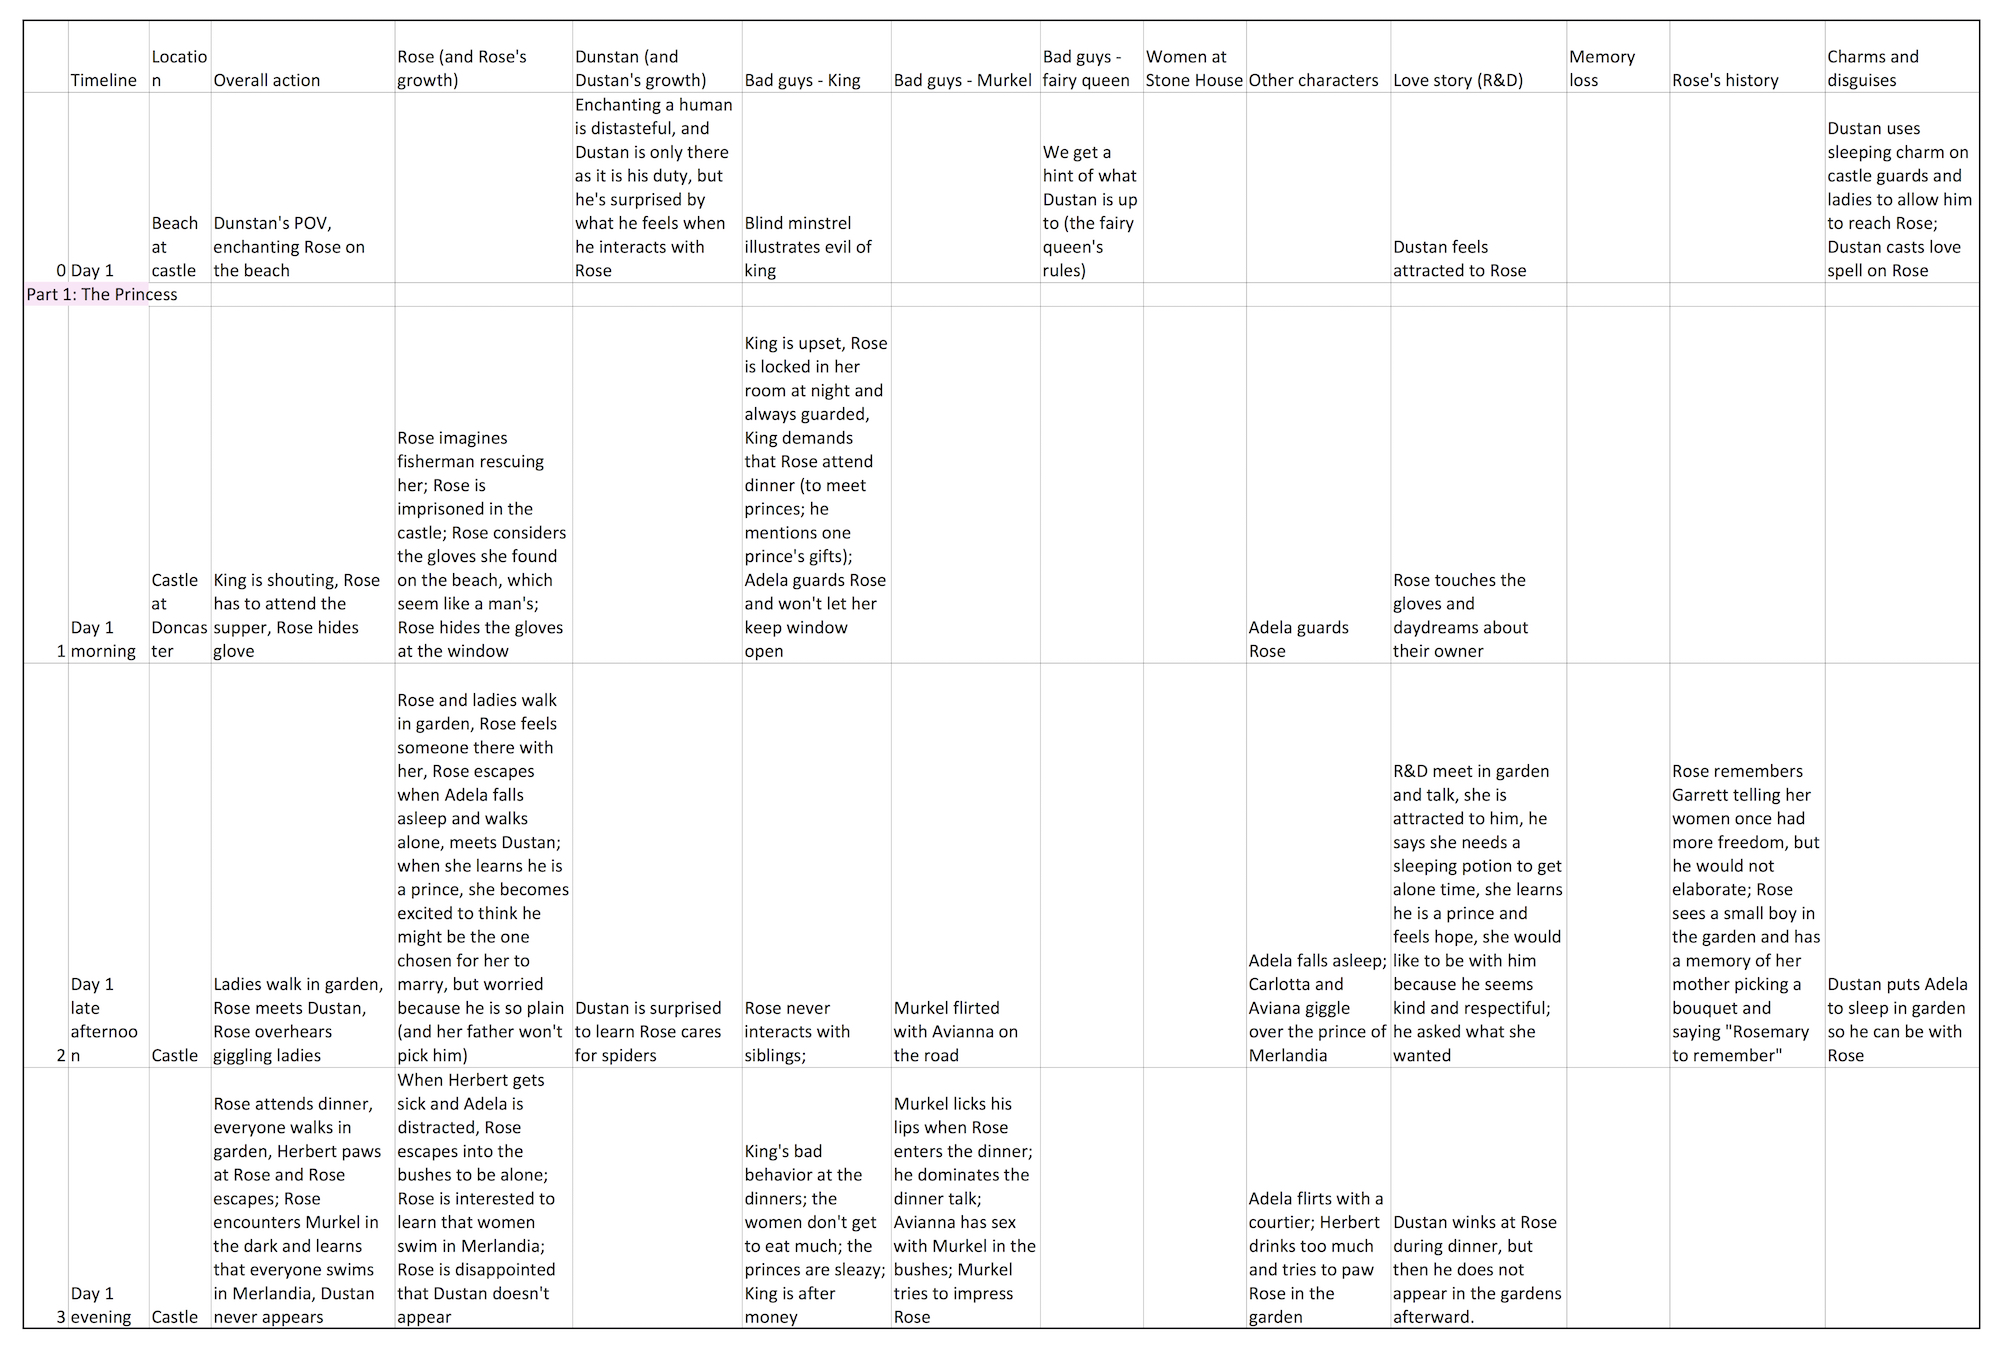 a table of book chapters with column headings of various themes, and relevant information from each chapter filled in